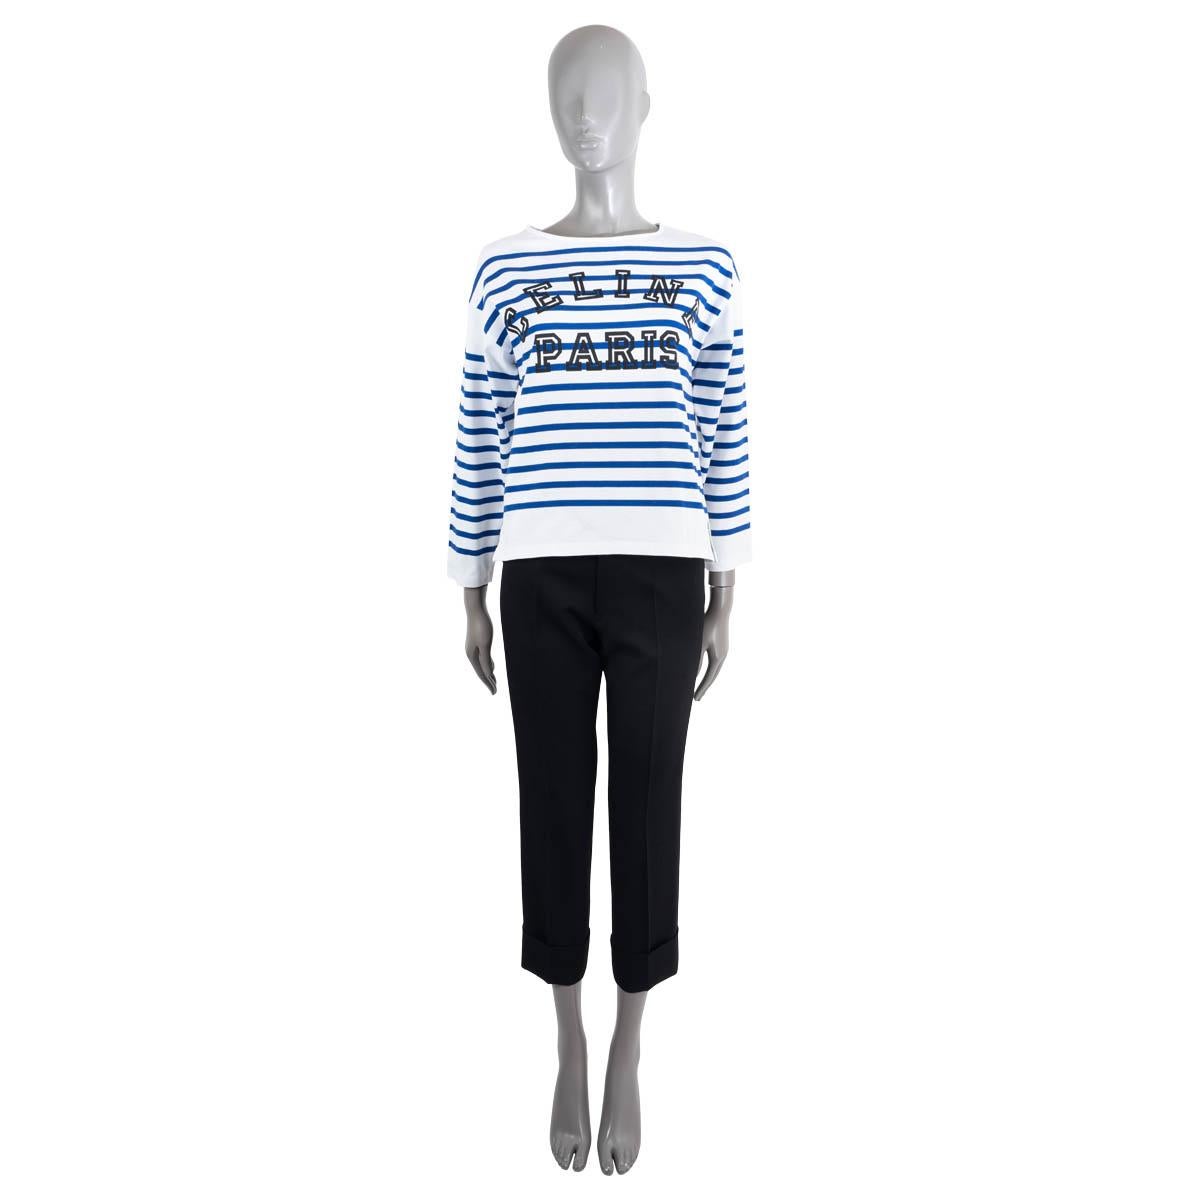 100% authentic Celine striped marinere 3/4 sleeve shirt in blue and white cotton (100% - please note the content tag is missing). Features a Celine Paris print in black. Has been worn and is in excellent condition.

Measurements
Model	2X781663K
Tag